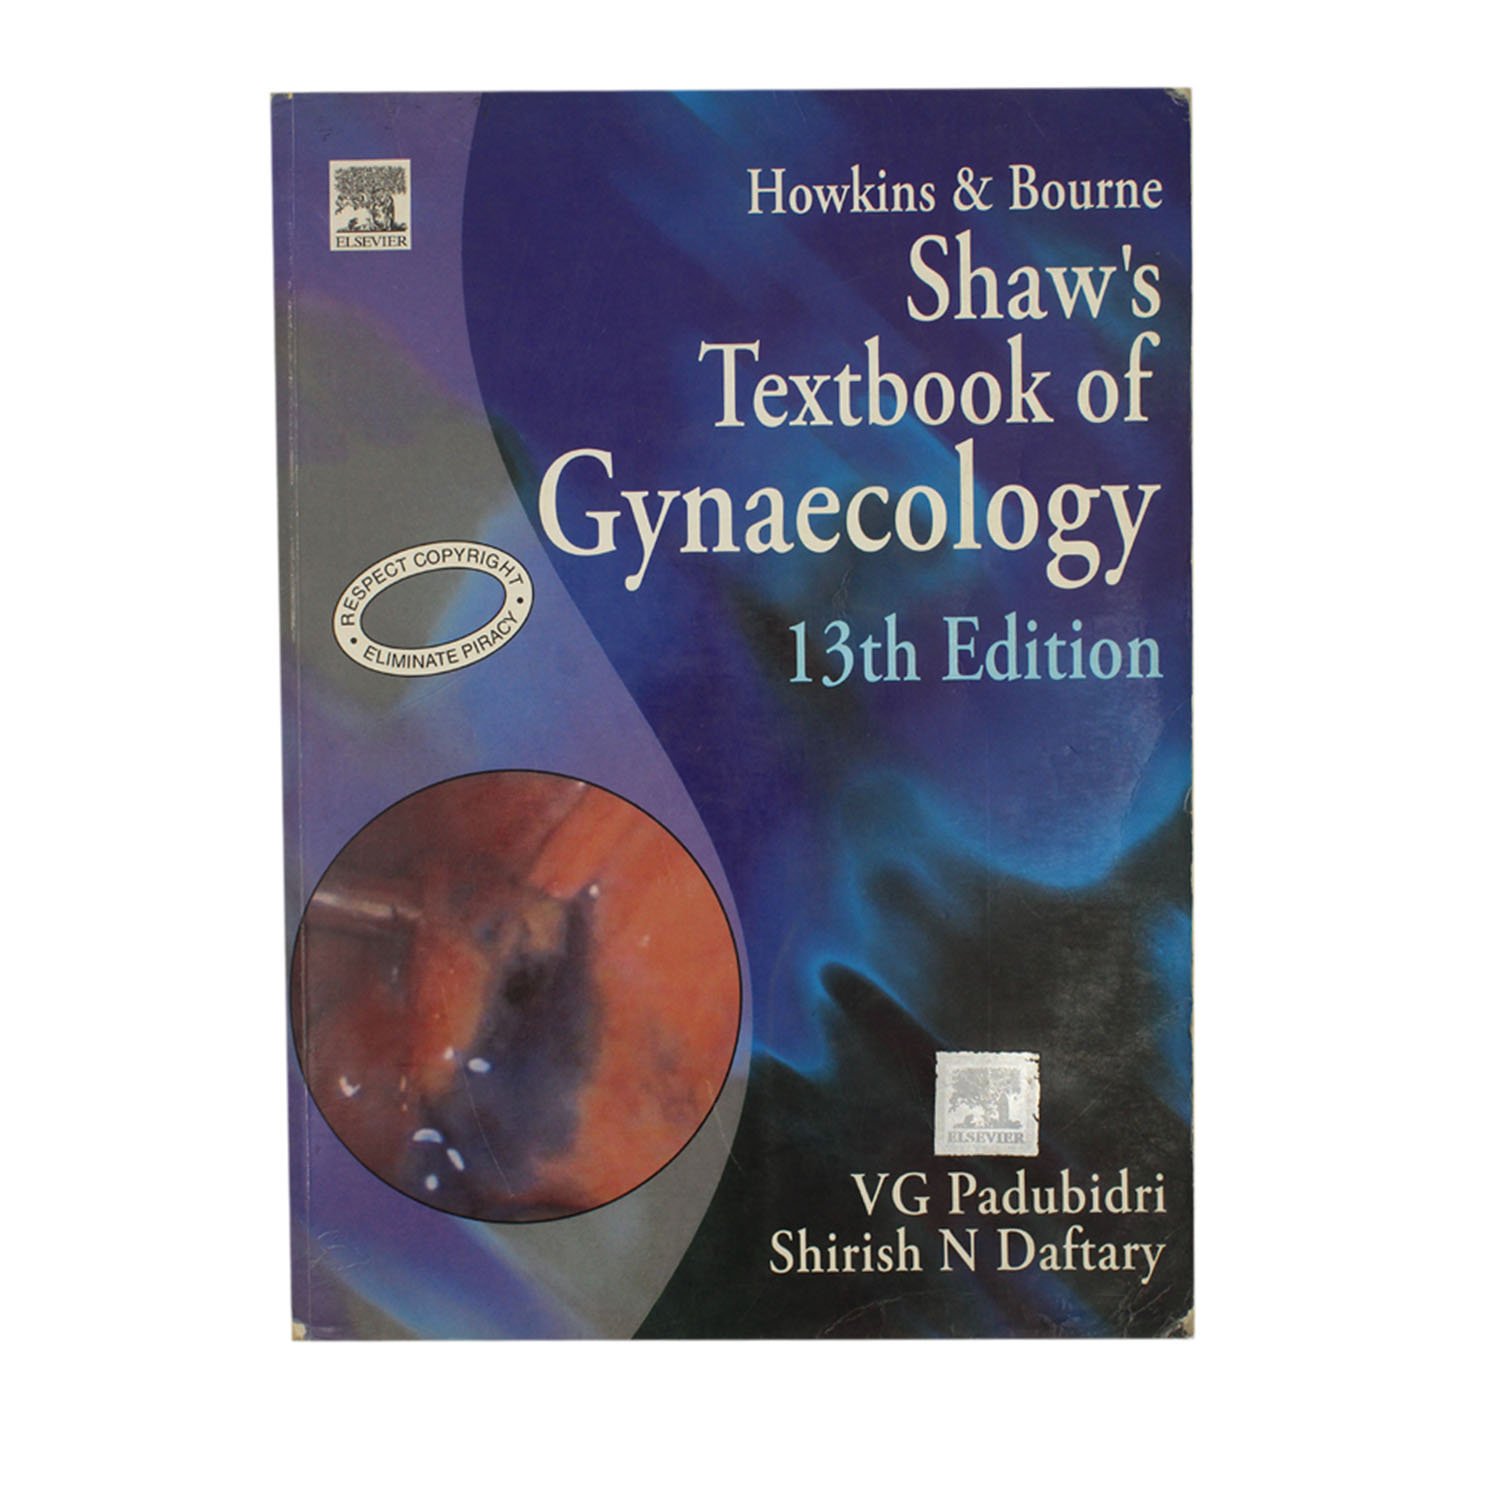 [PDF] Download Howkin’s & Bourne shaw’s textbook of gynaecology 15th Edition Book pdf